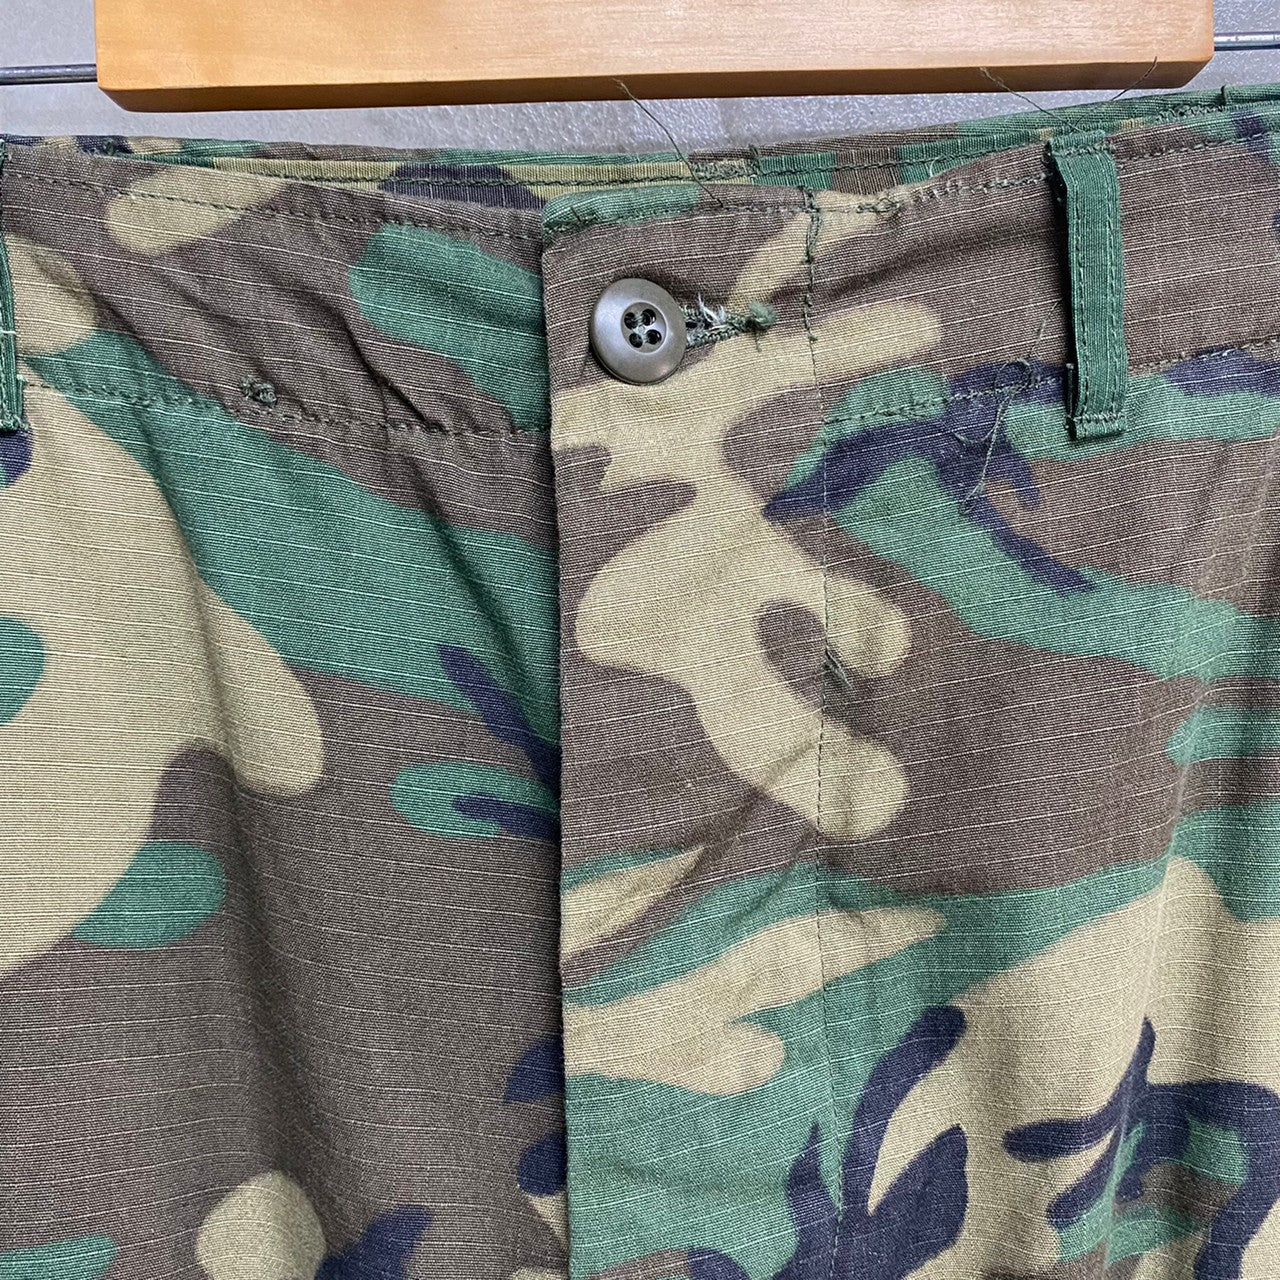 [ONLY ONE!] US ARMED FORCES JUNGLE FATIGUE TROUSERS / Mr.Clean Select